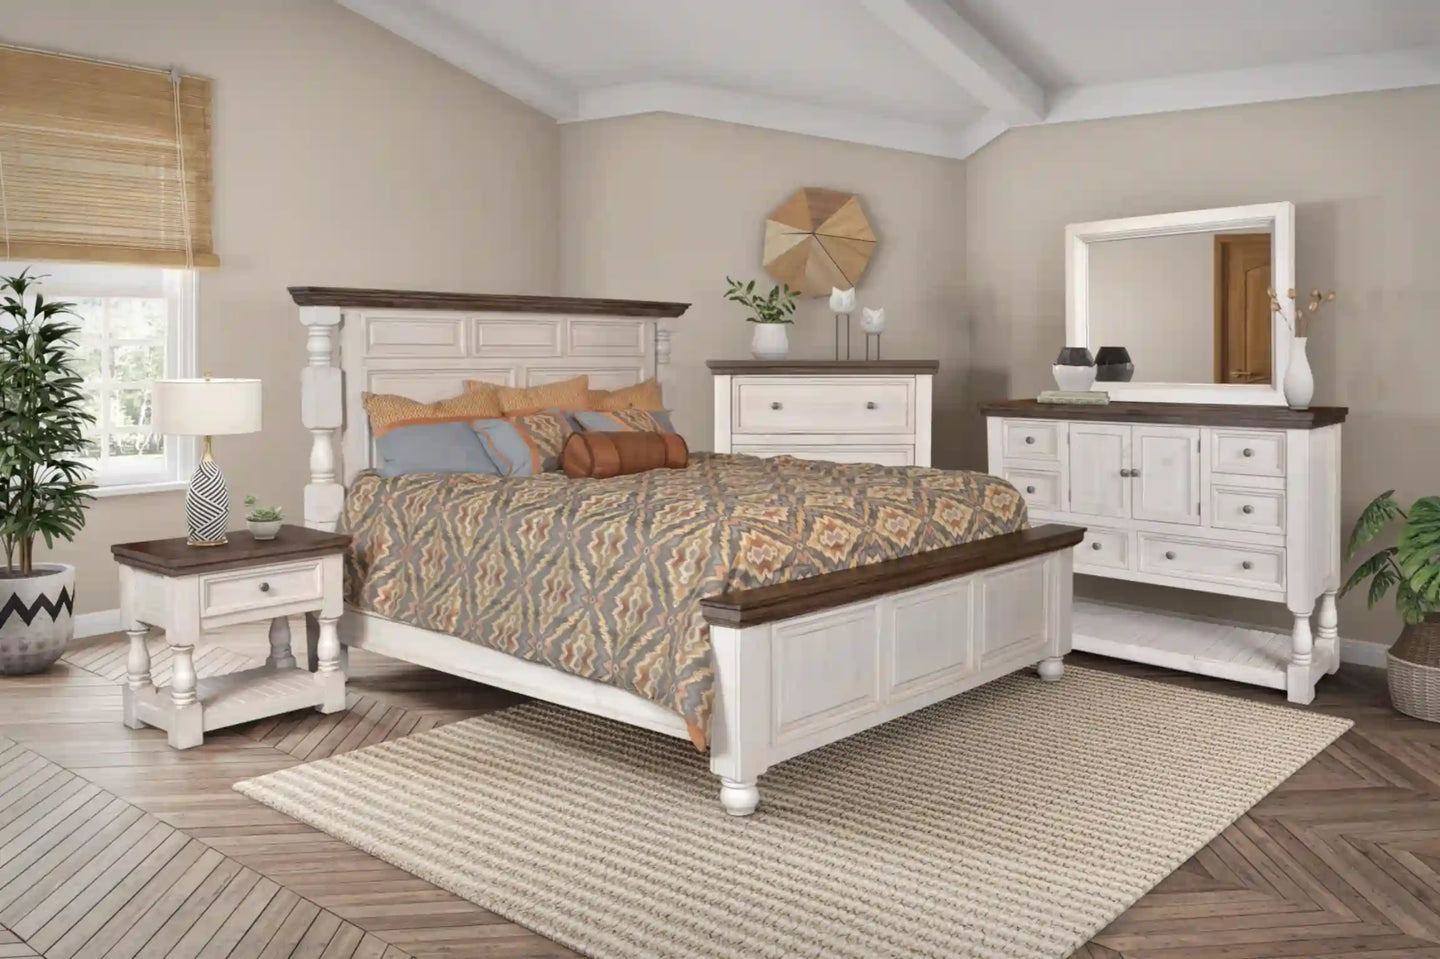 Sunset Trading Rustic French King Panel Bed | Distressed White and Brown Solid Wood